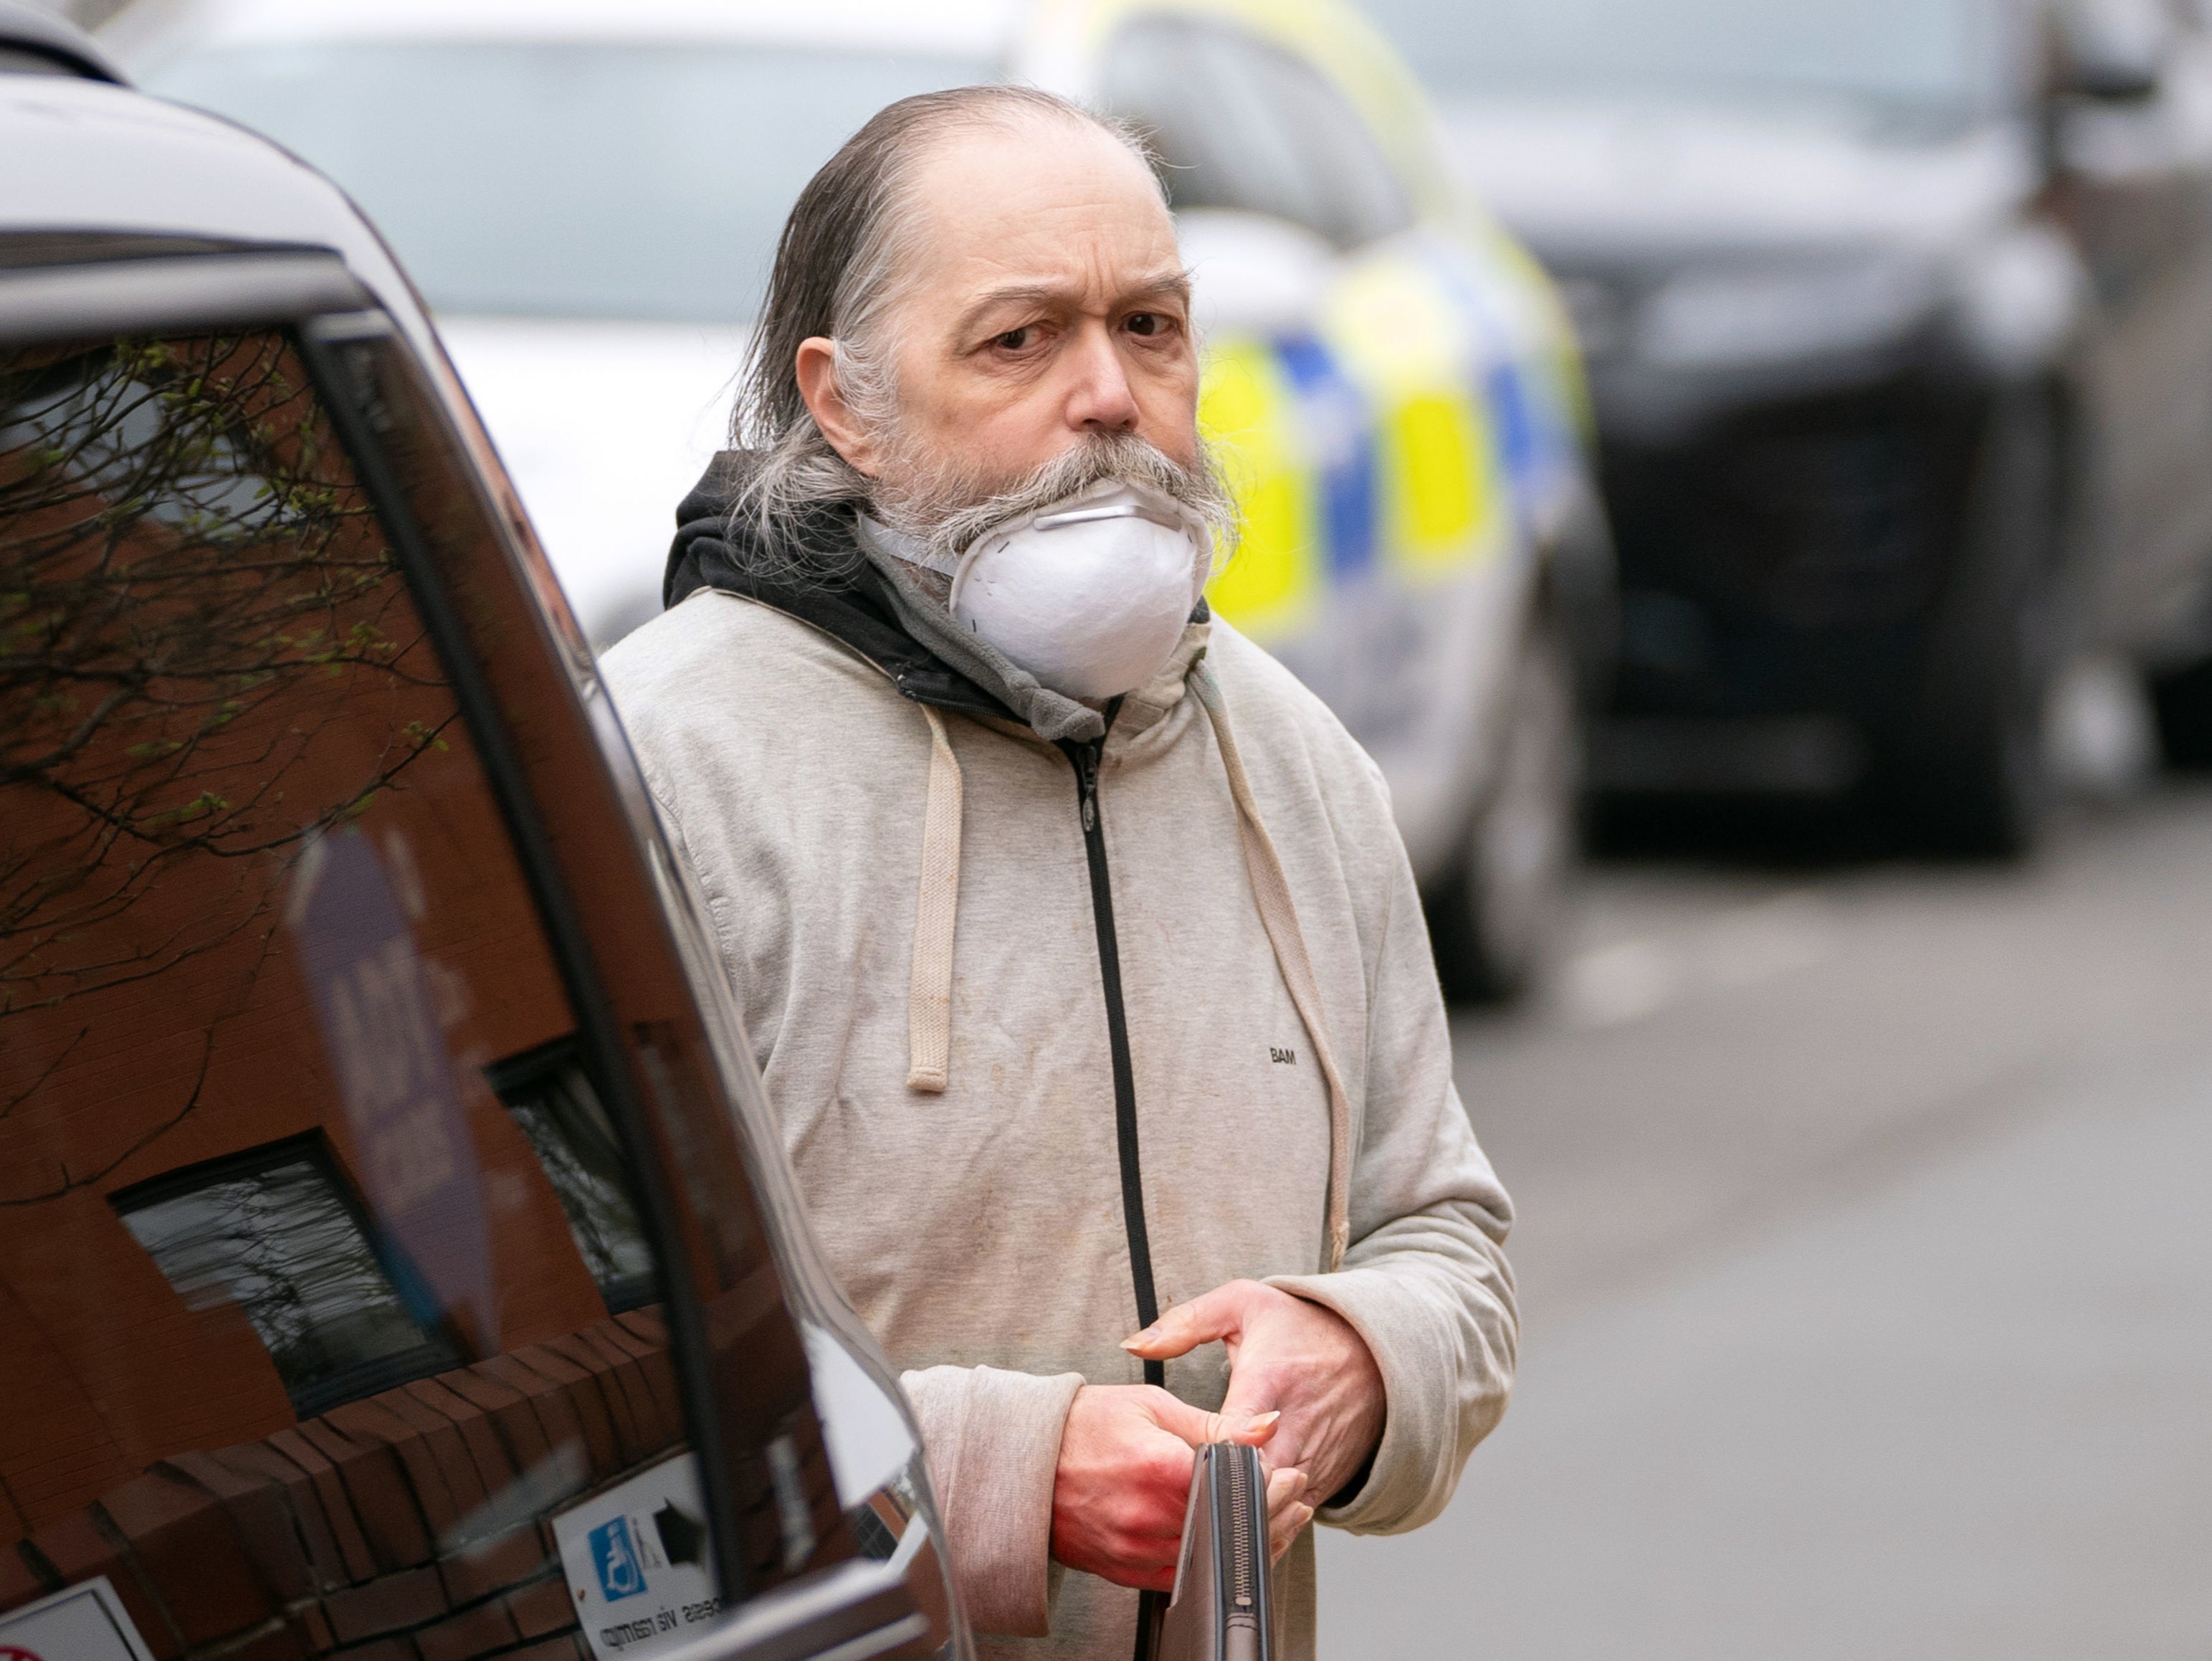 Hoarder Philip Burdett, 59, has been jailed for three years after leaving his immobile sister to die on a bedroom floor